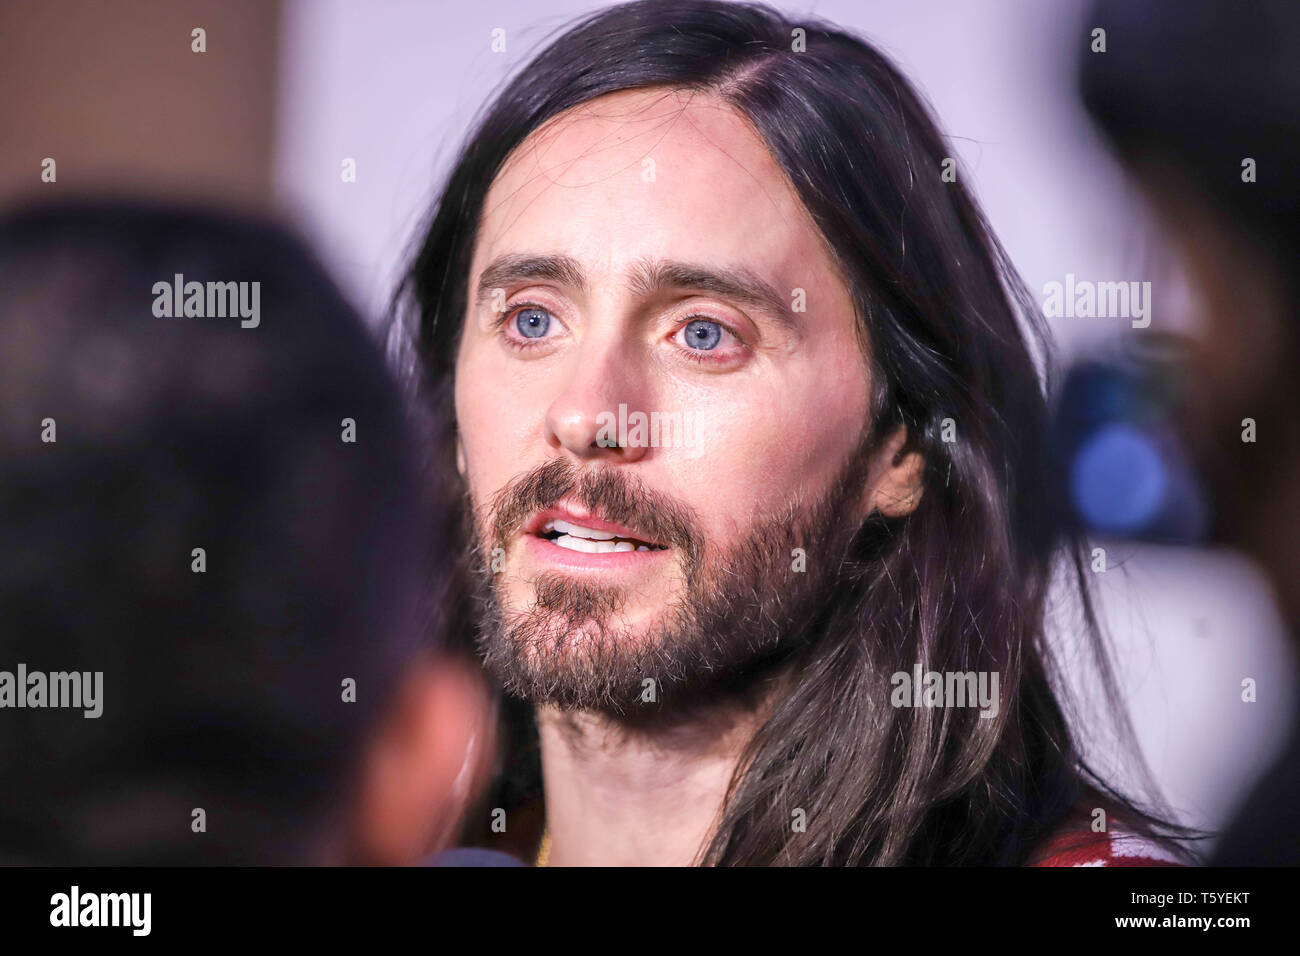 new-york-new-york-usa-27th-apr-2019-jared-leto-attends-a-day-in-the-life-of-america-screening-at-the-2019-tribeca-film-festival-at-bmcc-tribeca-pac-on-april-27-2019-in-new-york-city-credit-william-volcovzuma-wirealamy-live-news-T5YEKT.jpg